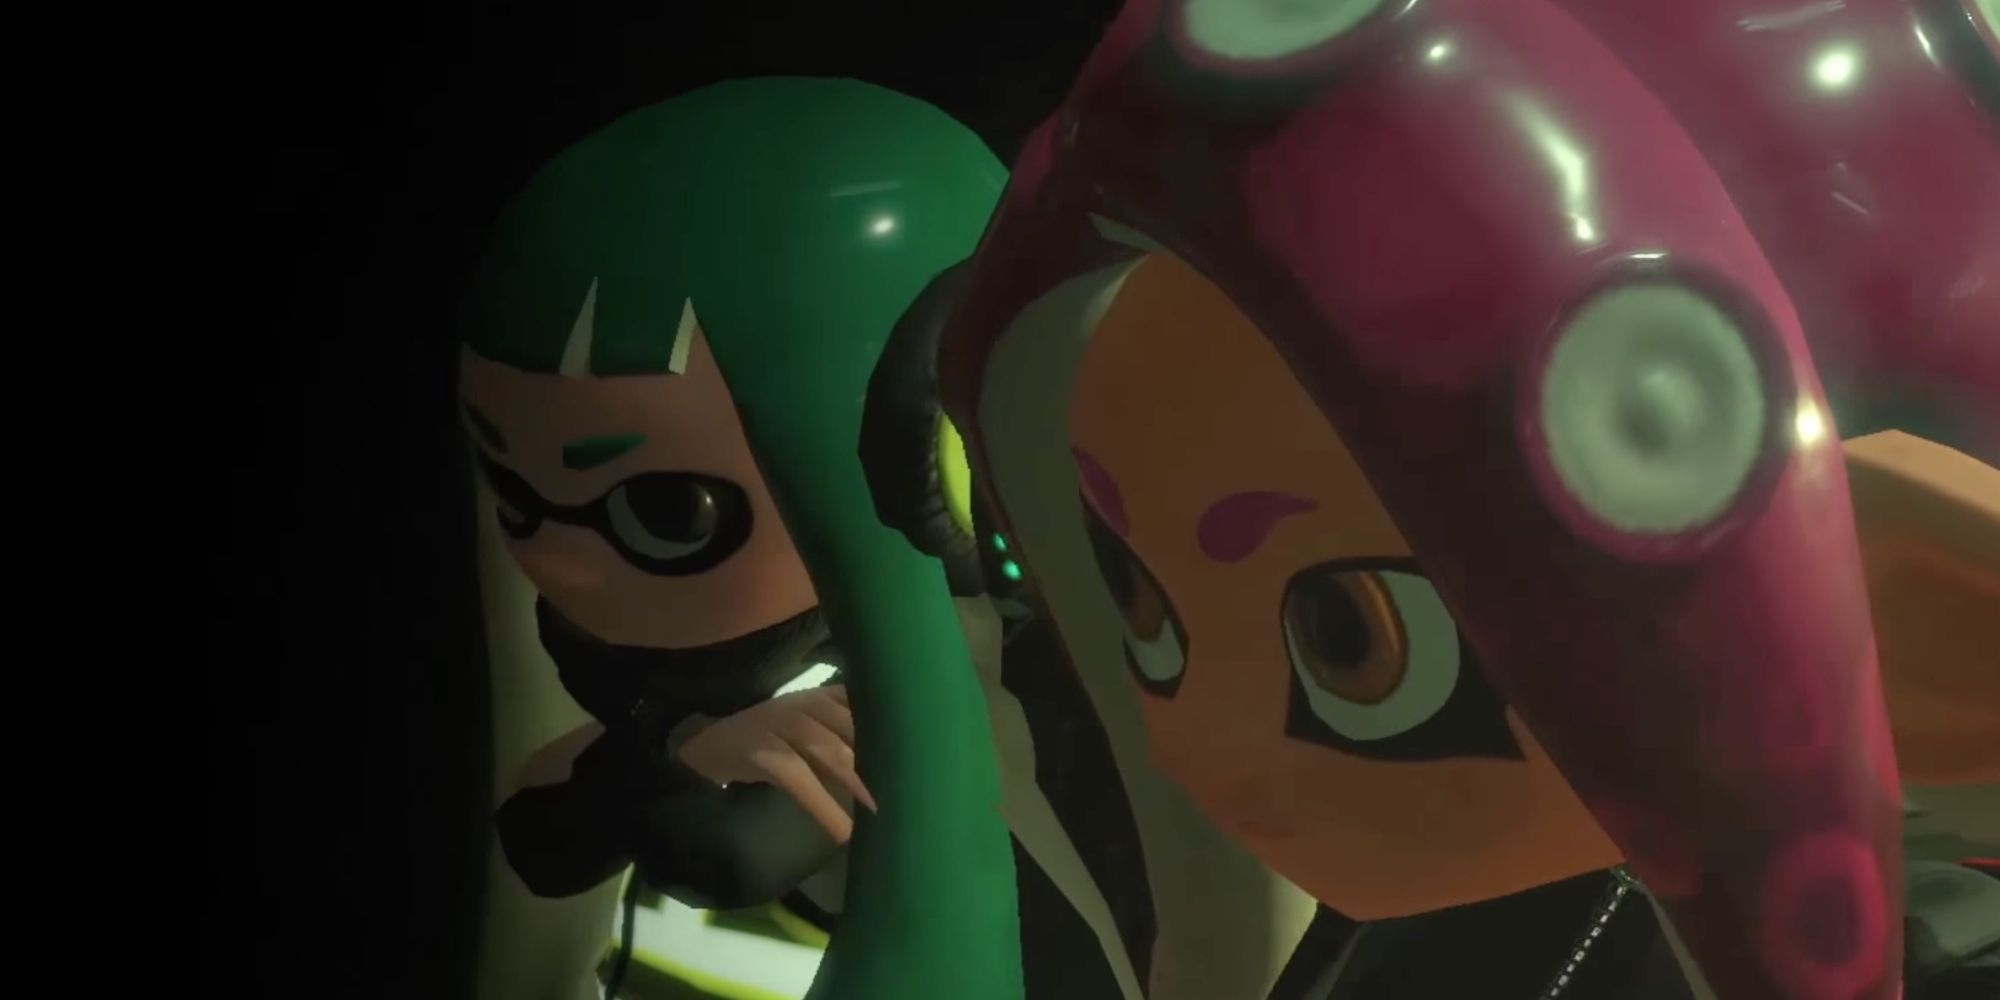 Agent 3 and Agent 8 from Splatoon 2 Octo Expansion